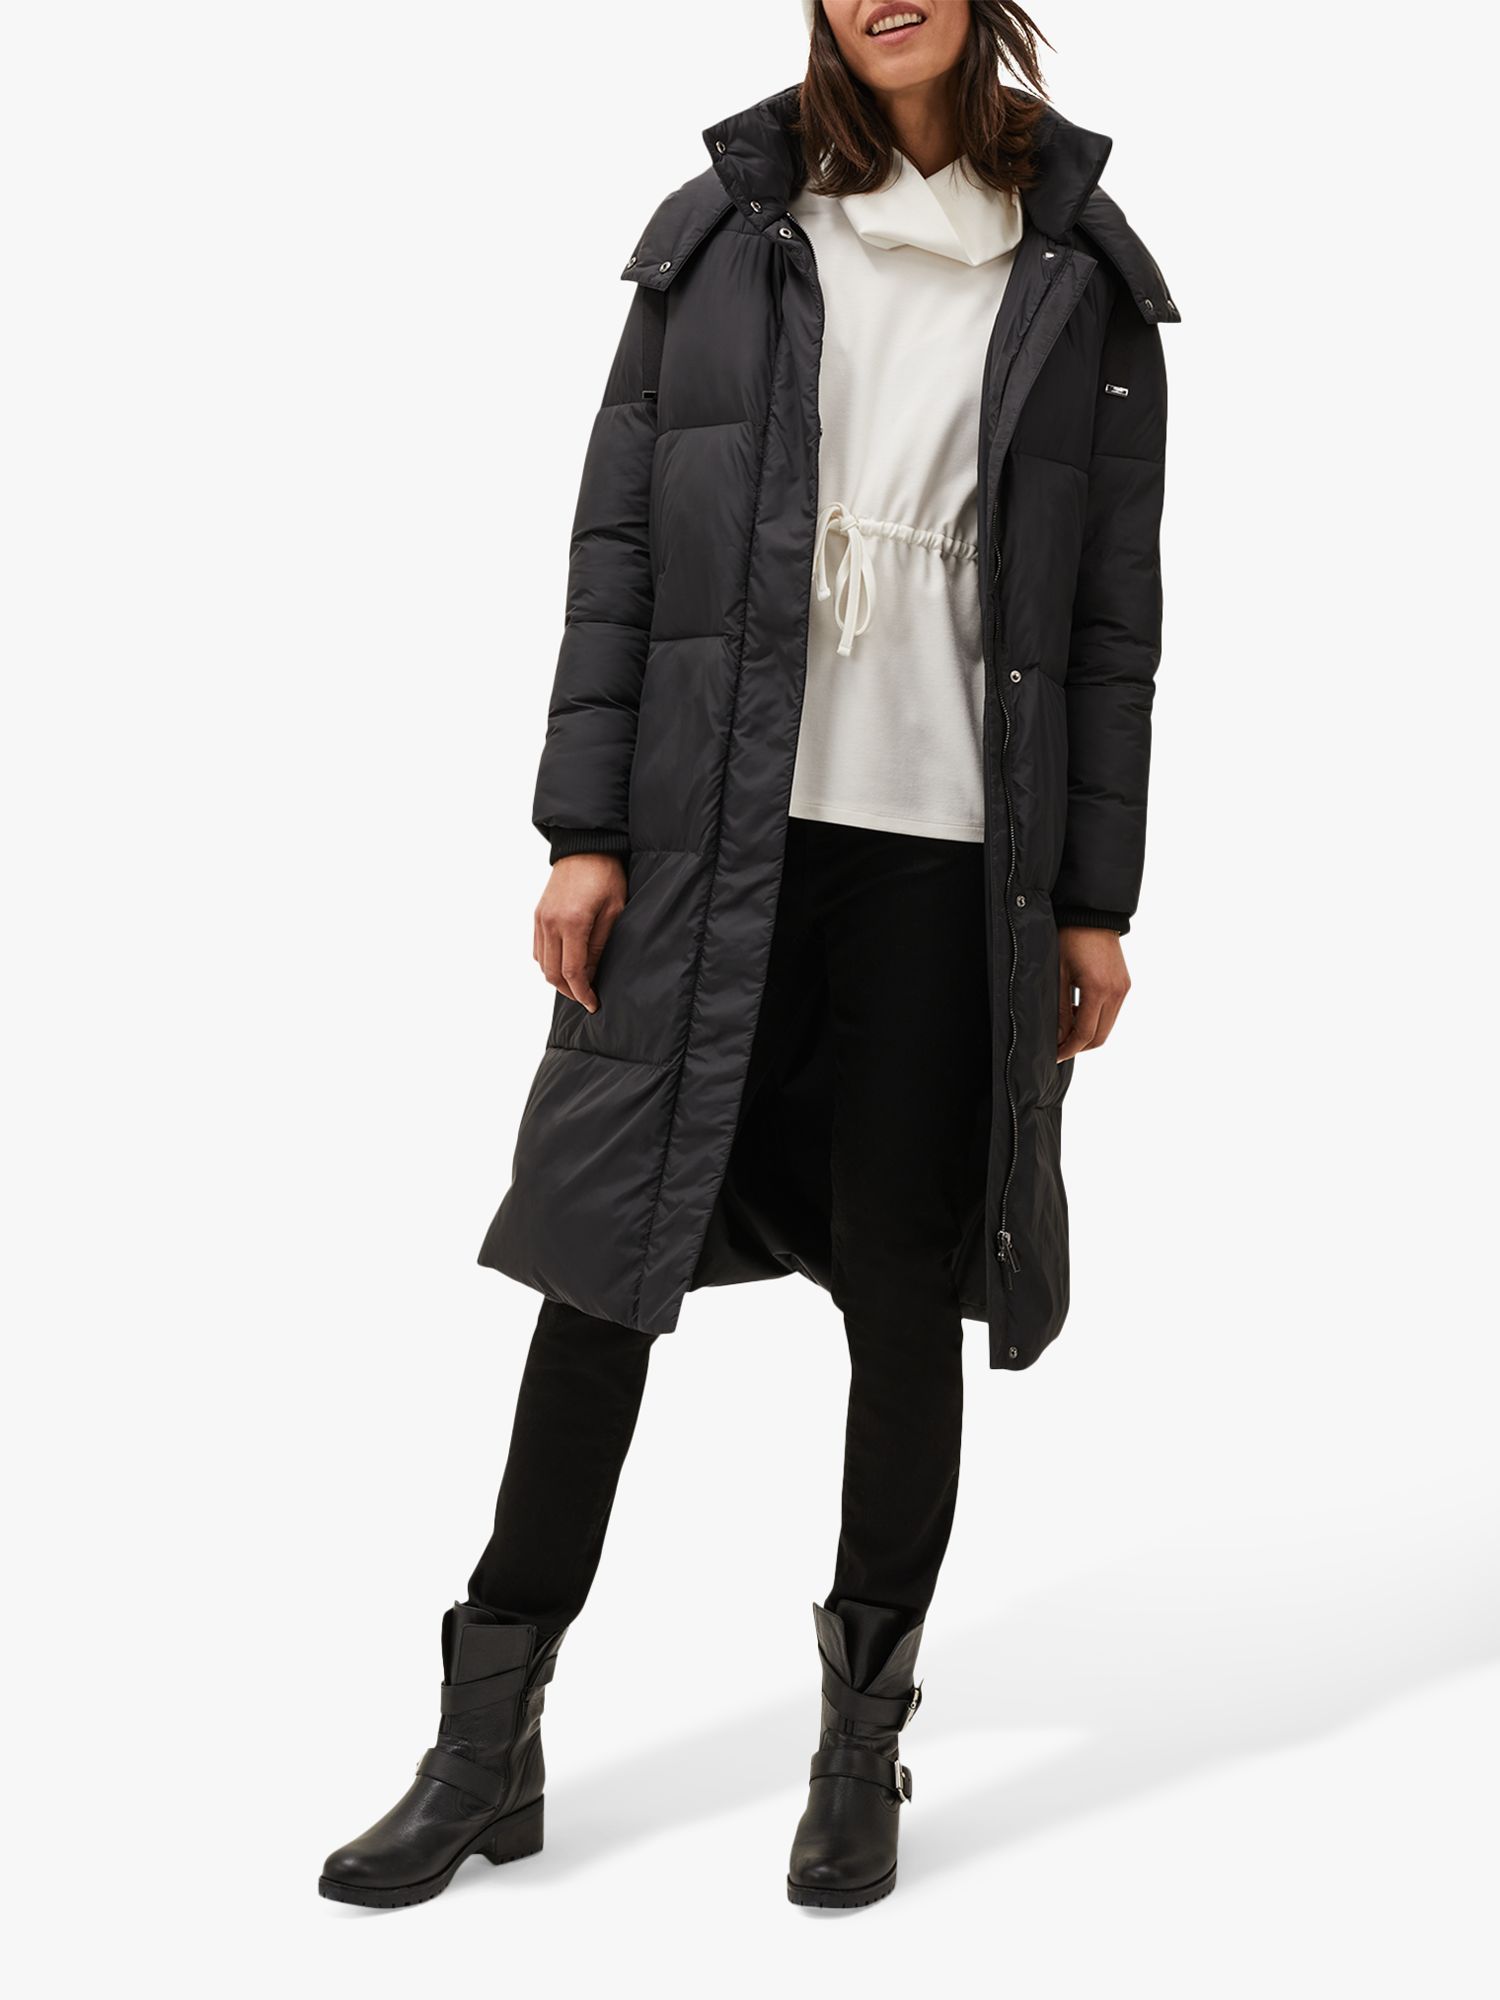 Phase Eight Shona Knee Length Quilted Coat, Black